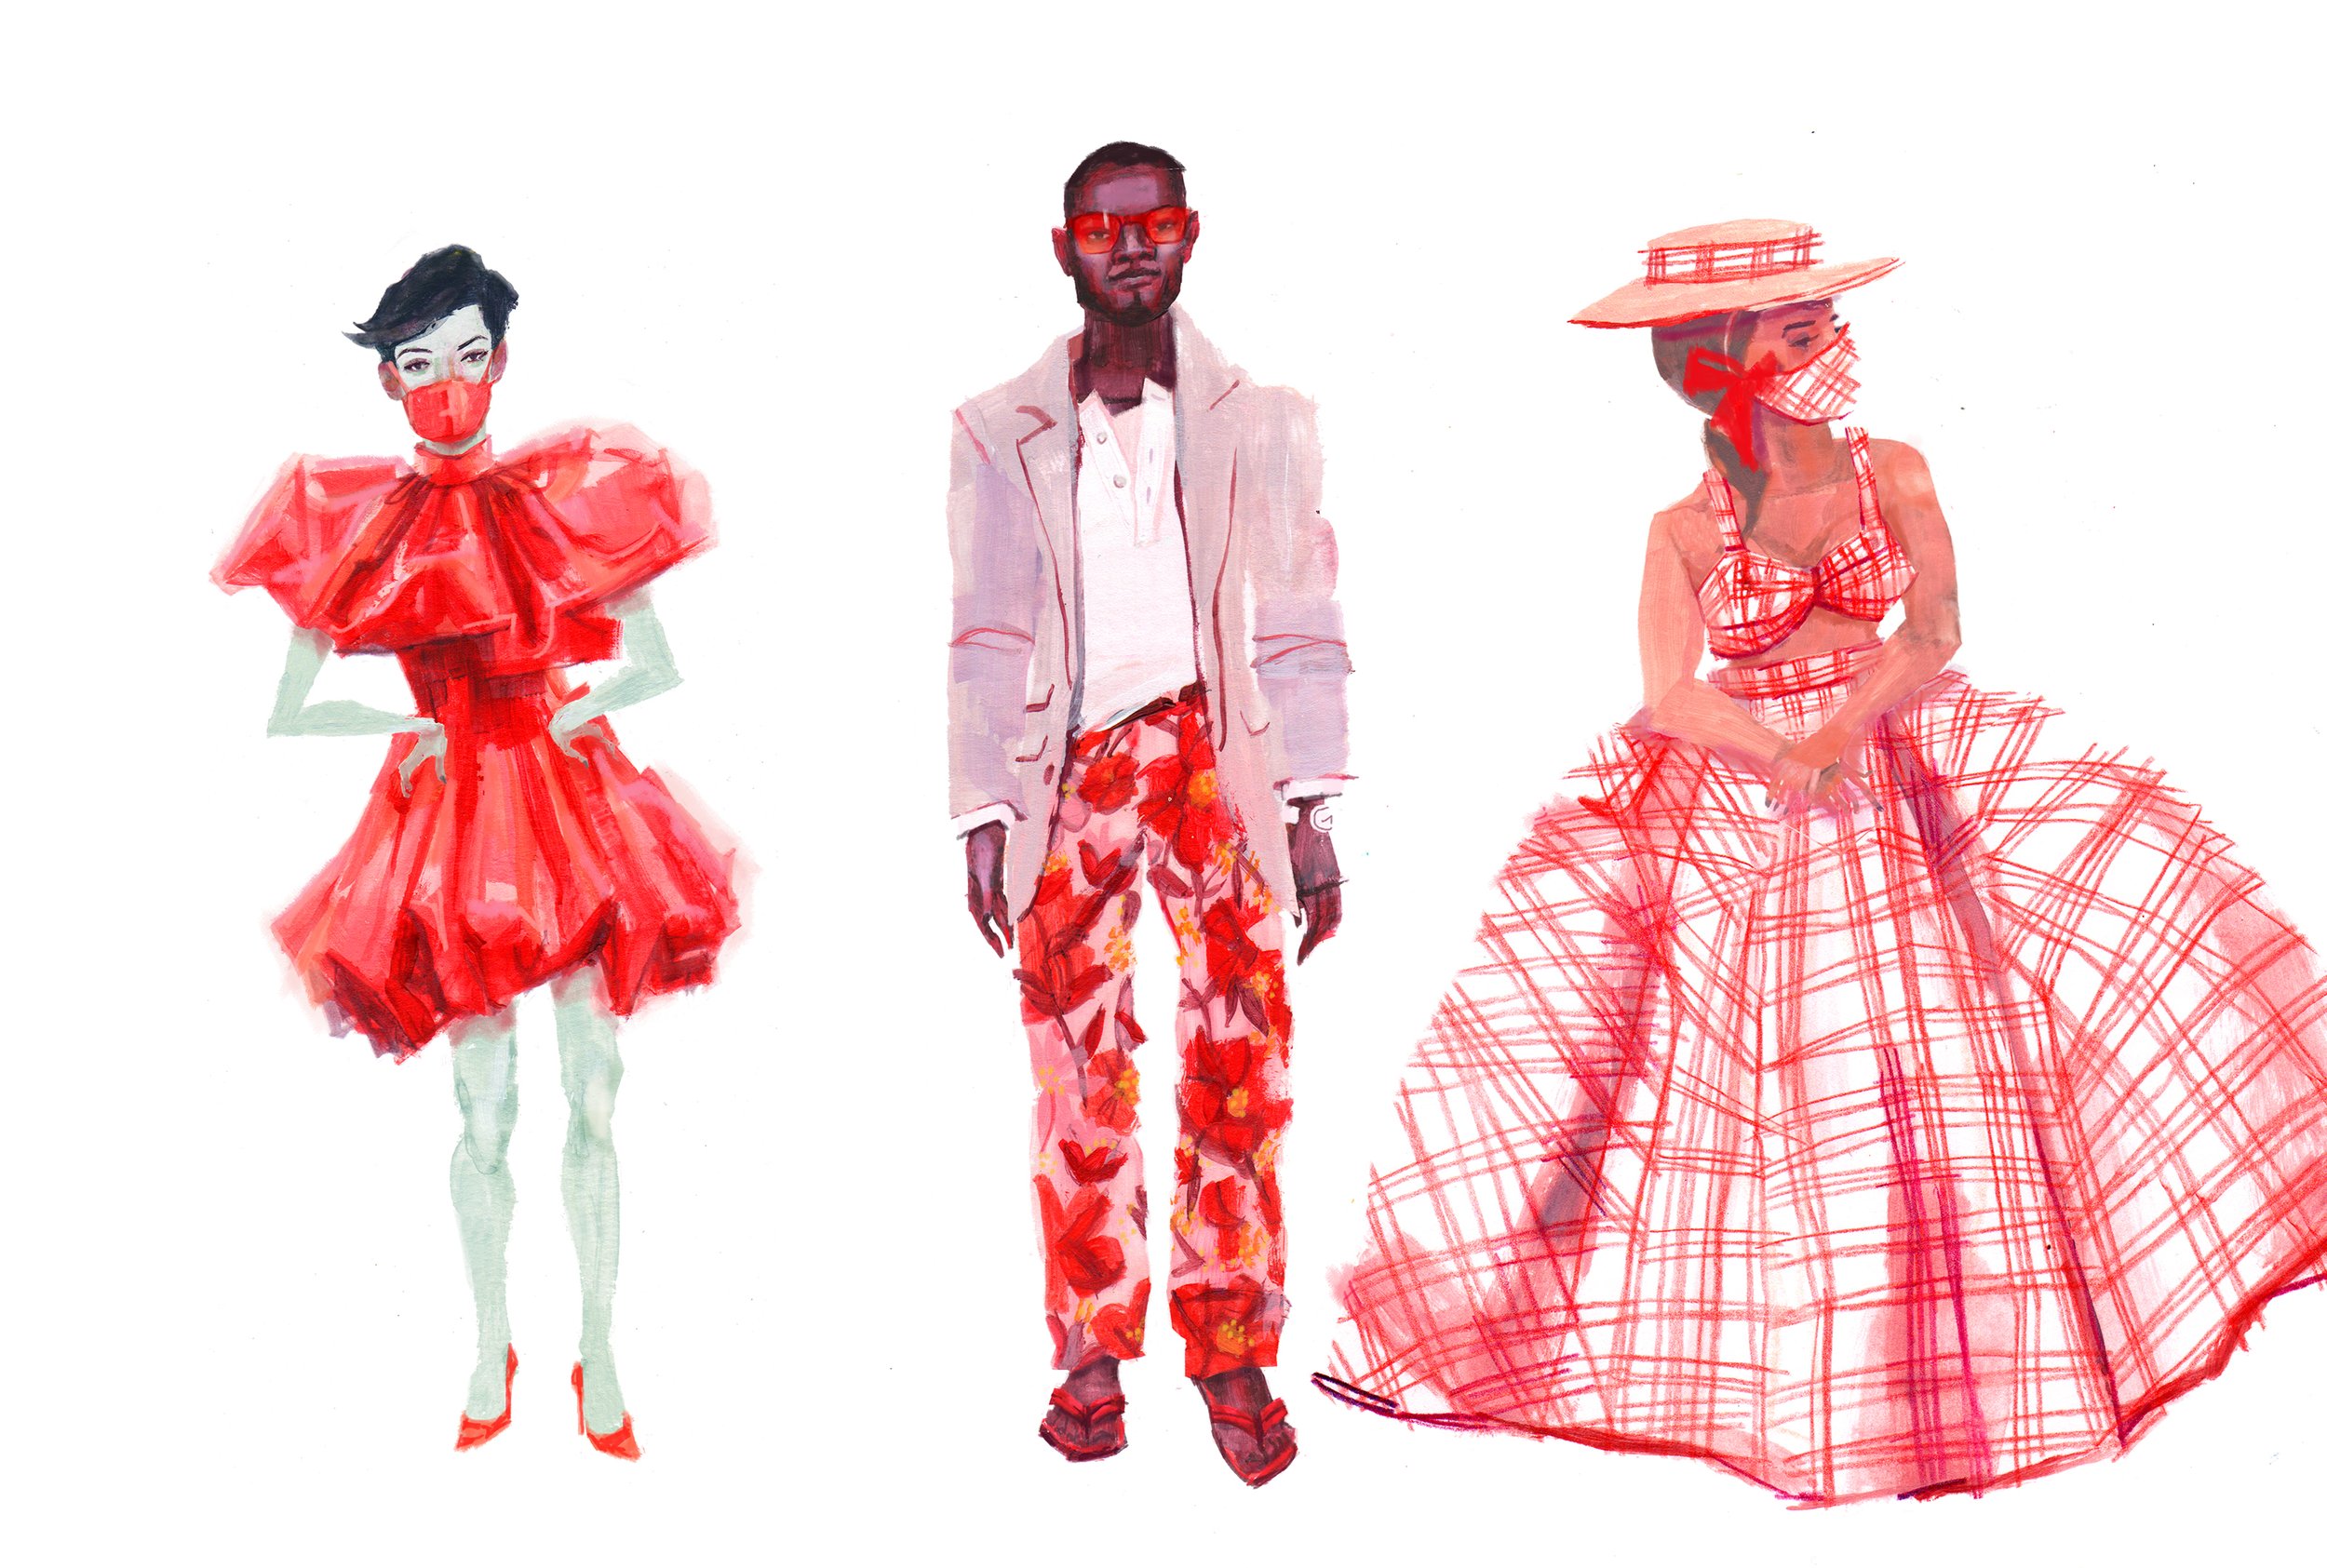  Paper Dolls week 1 - Garden Party theme! Dresses from Christian Siriano’s 2021 Spring Ready to Wear collection &amp; suit is from Tom Ford 2021 Spring Menswear collection 